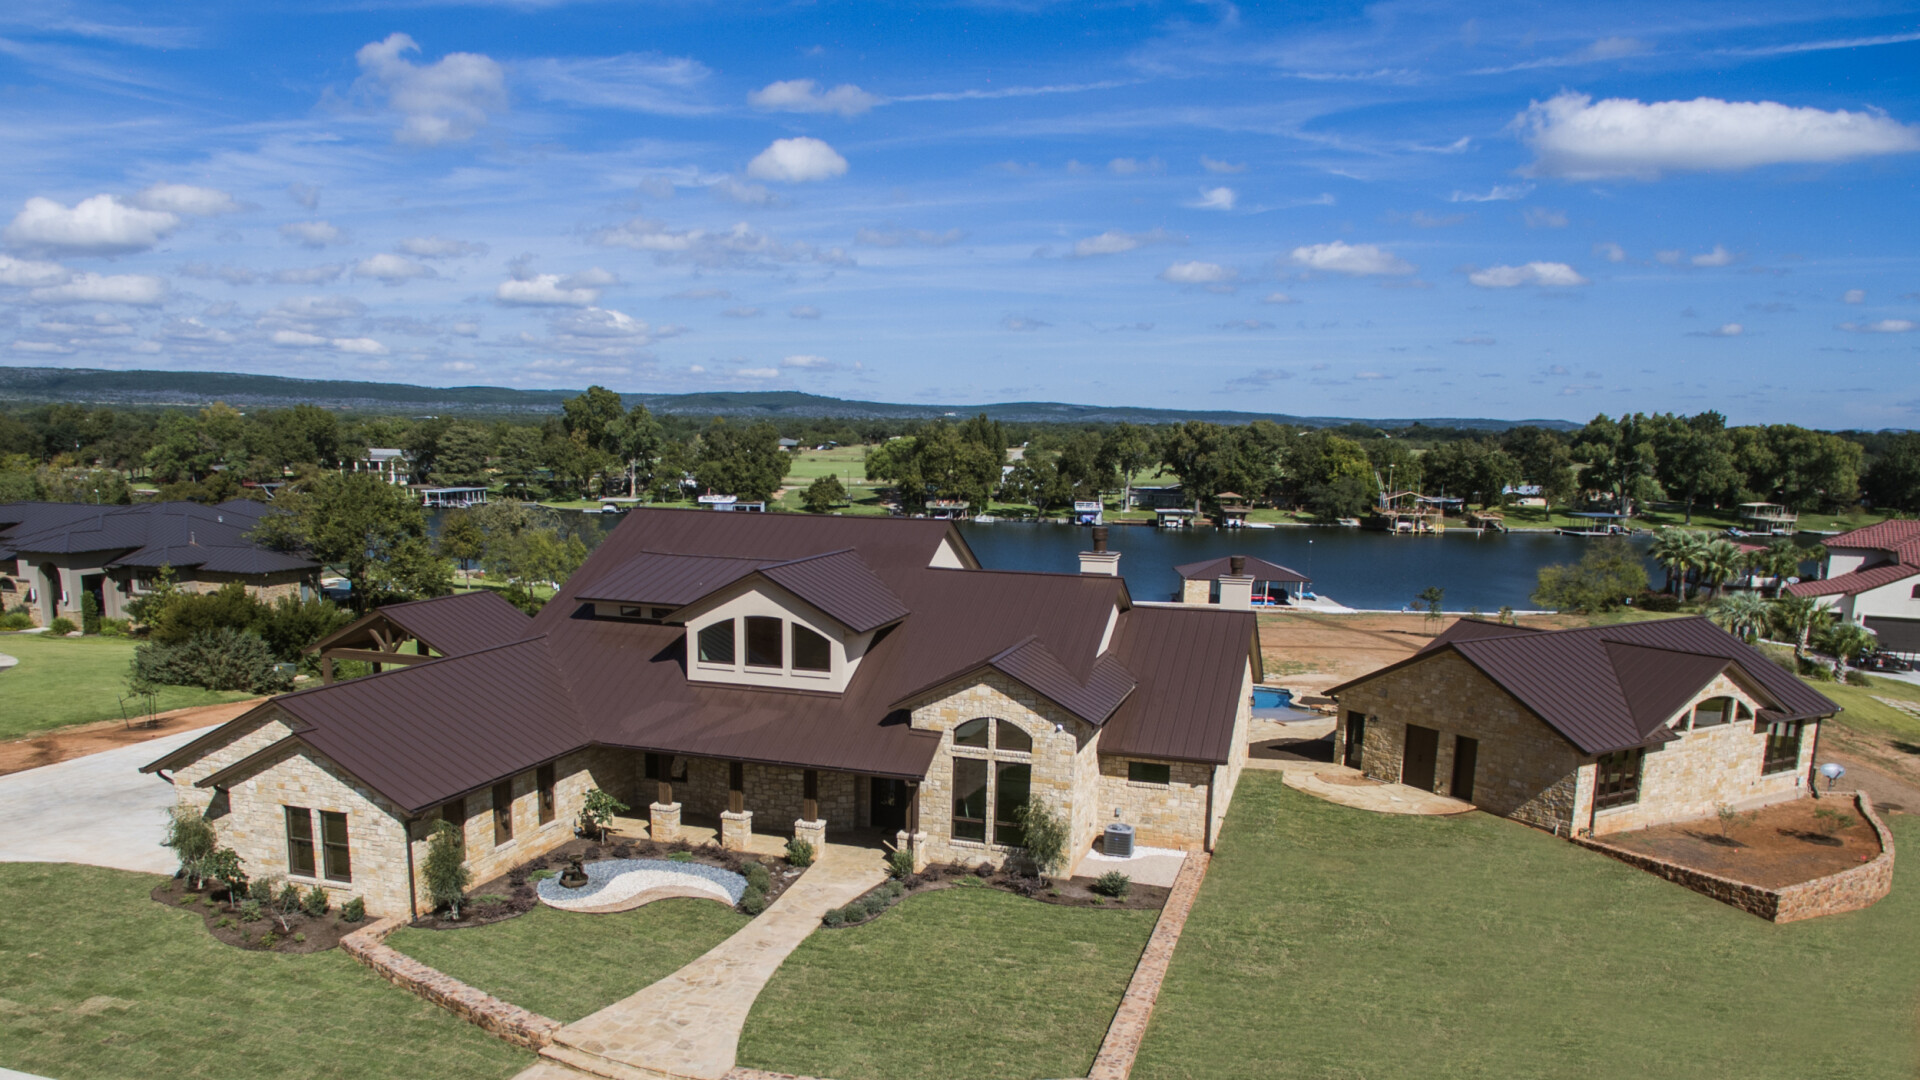 Aerial view of a custom home with a sophisticated stone exterior nestled on the lake, Lake LBJ TX